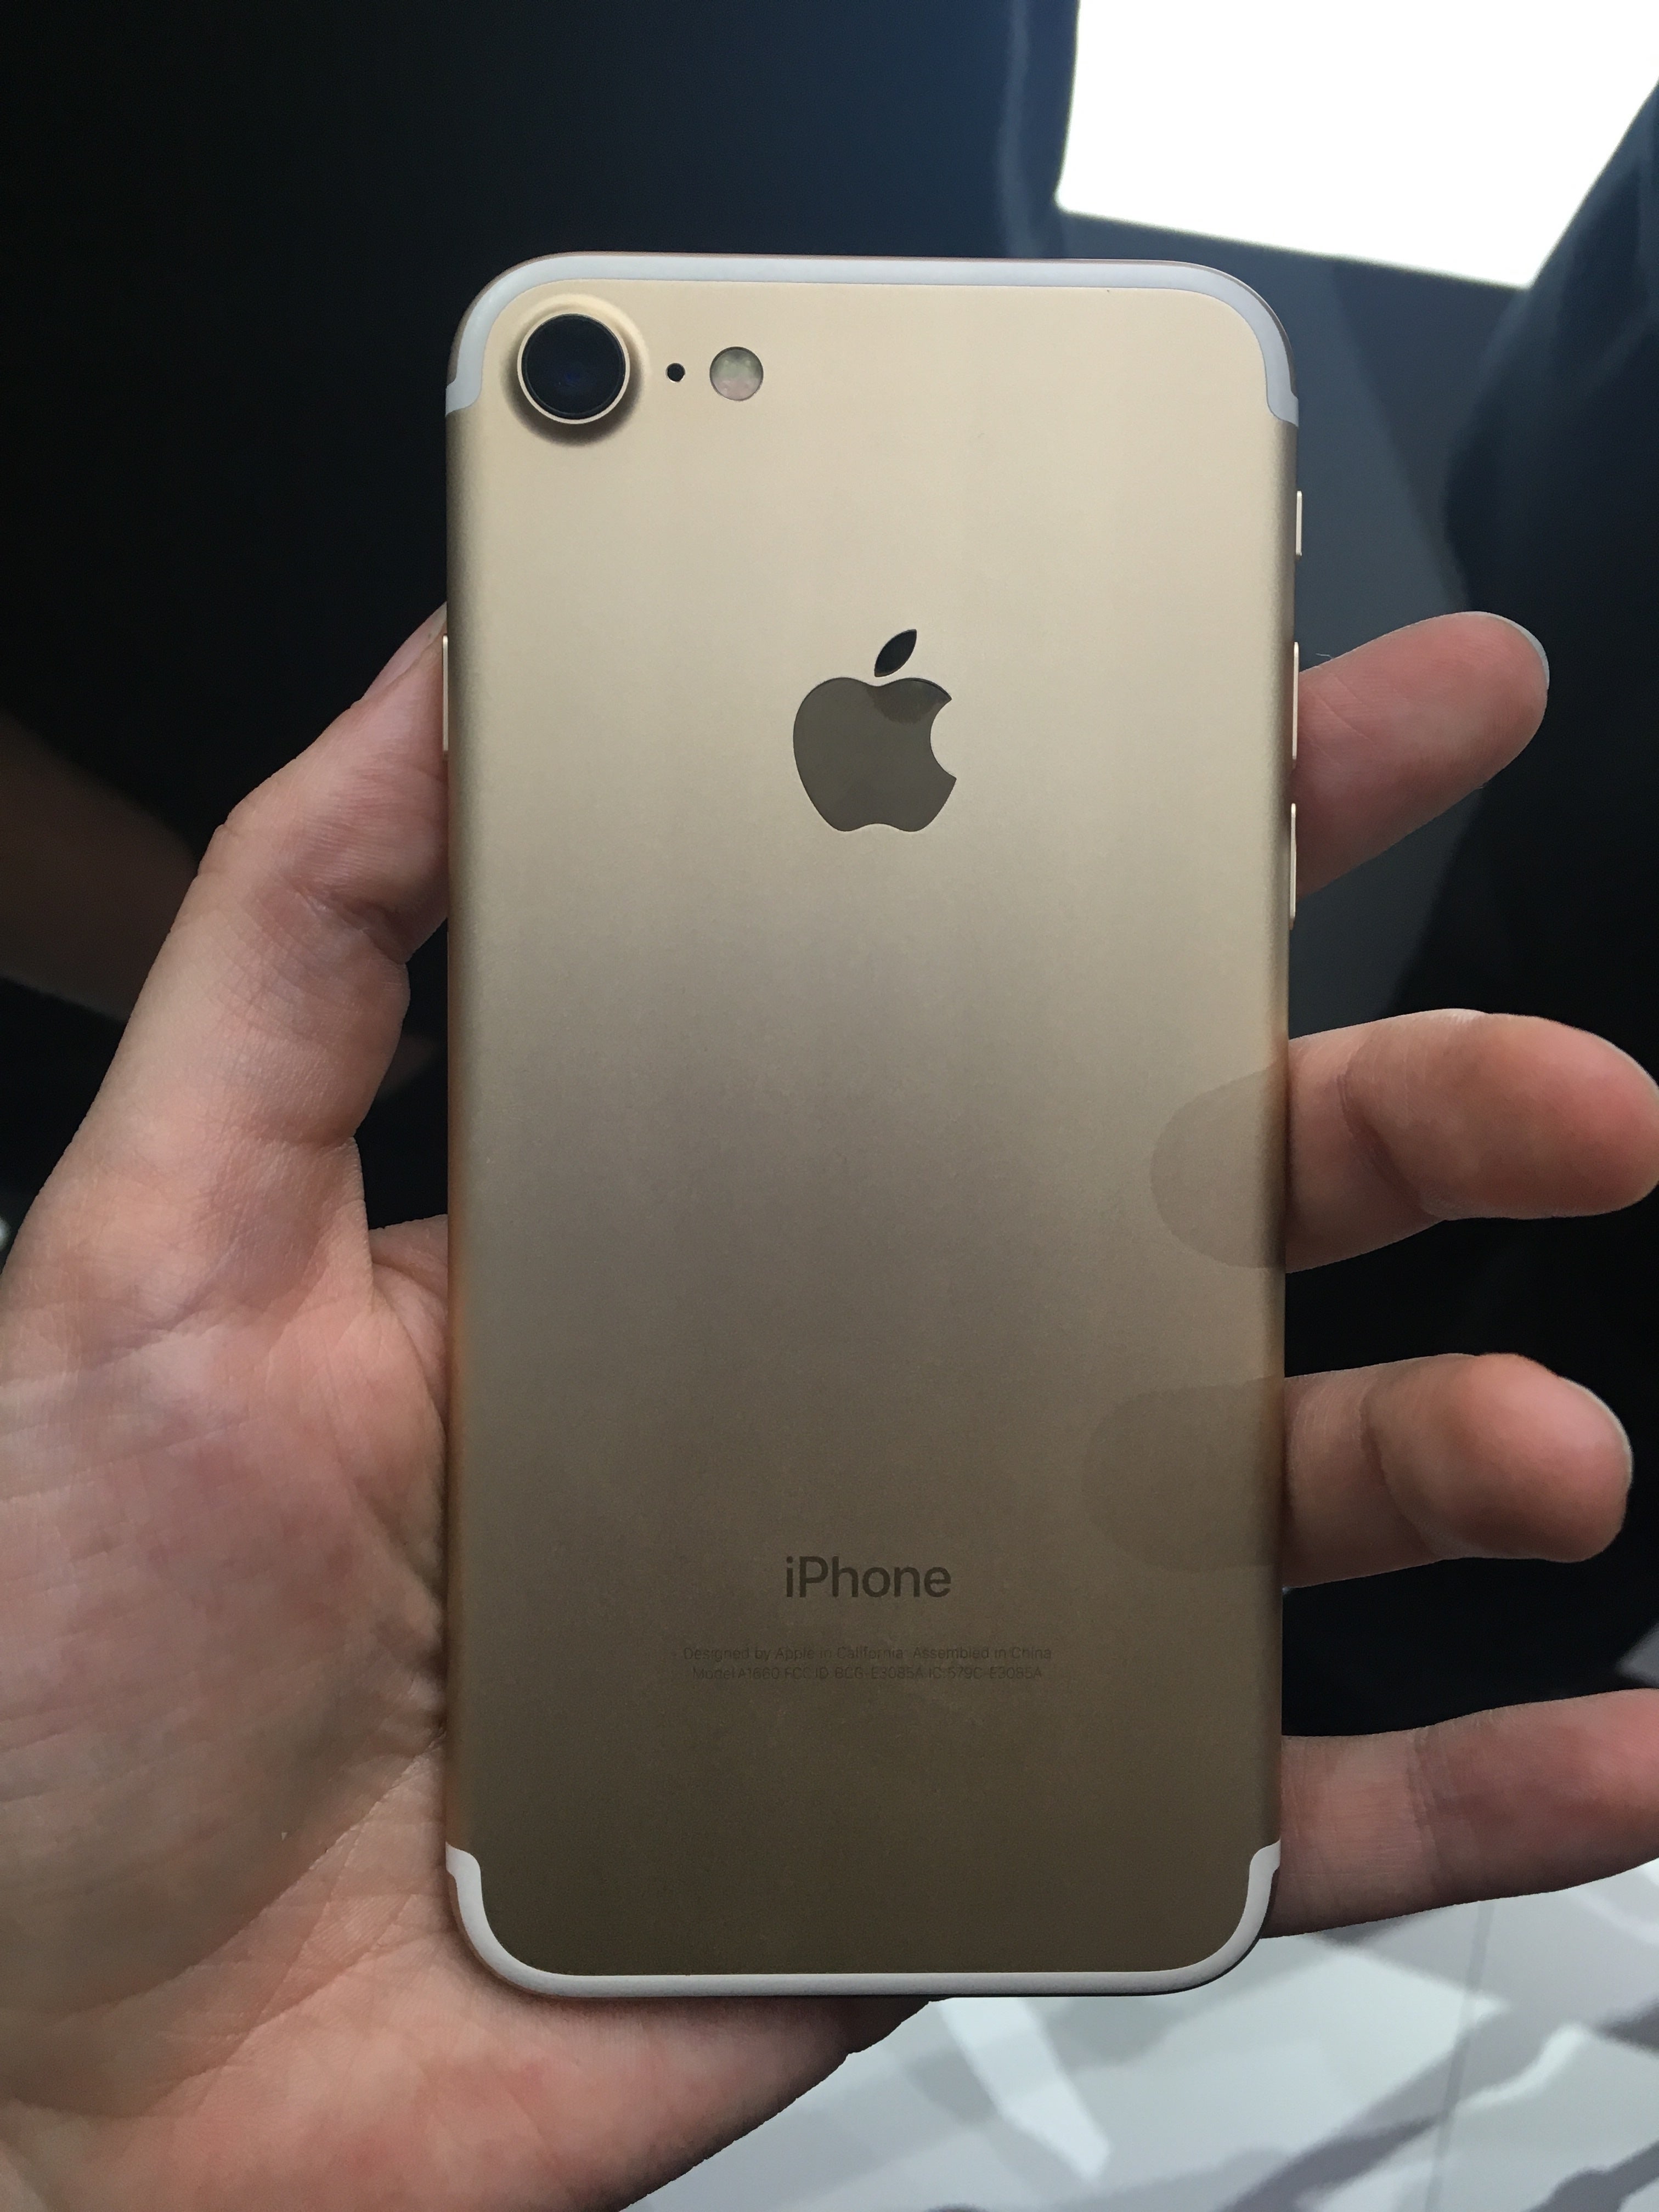 iPhone 7 hands on